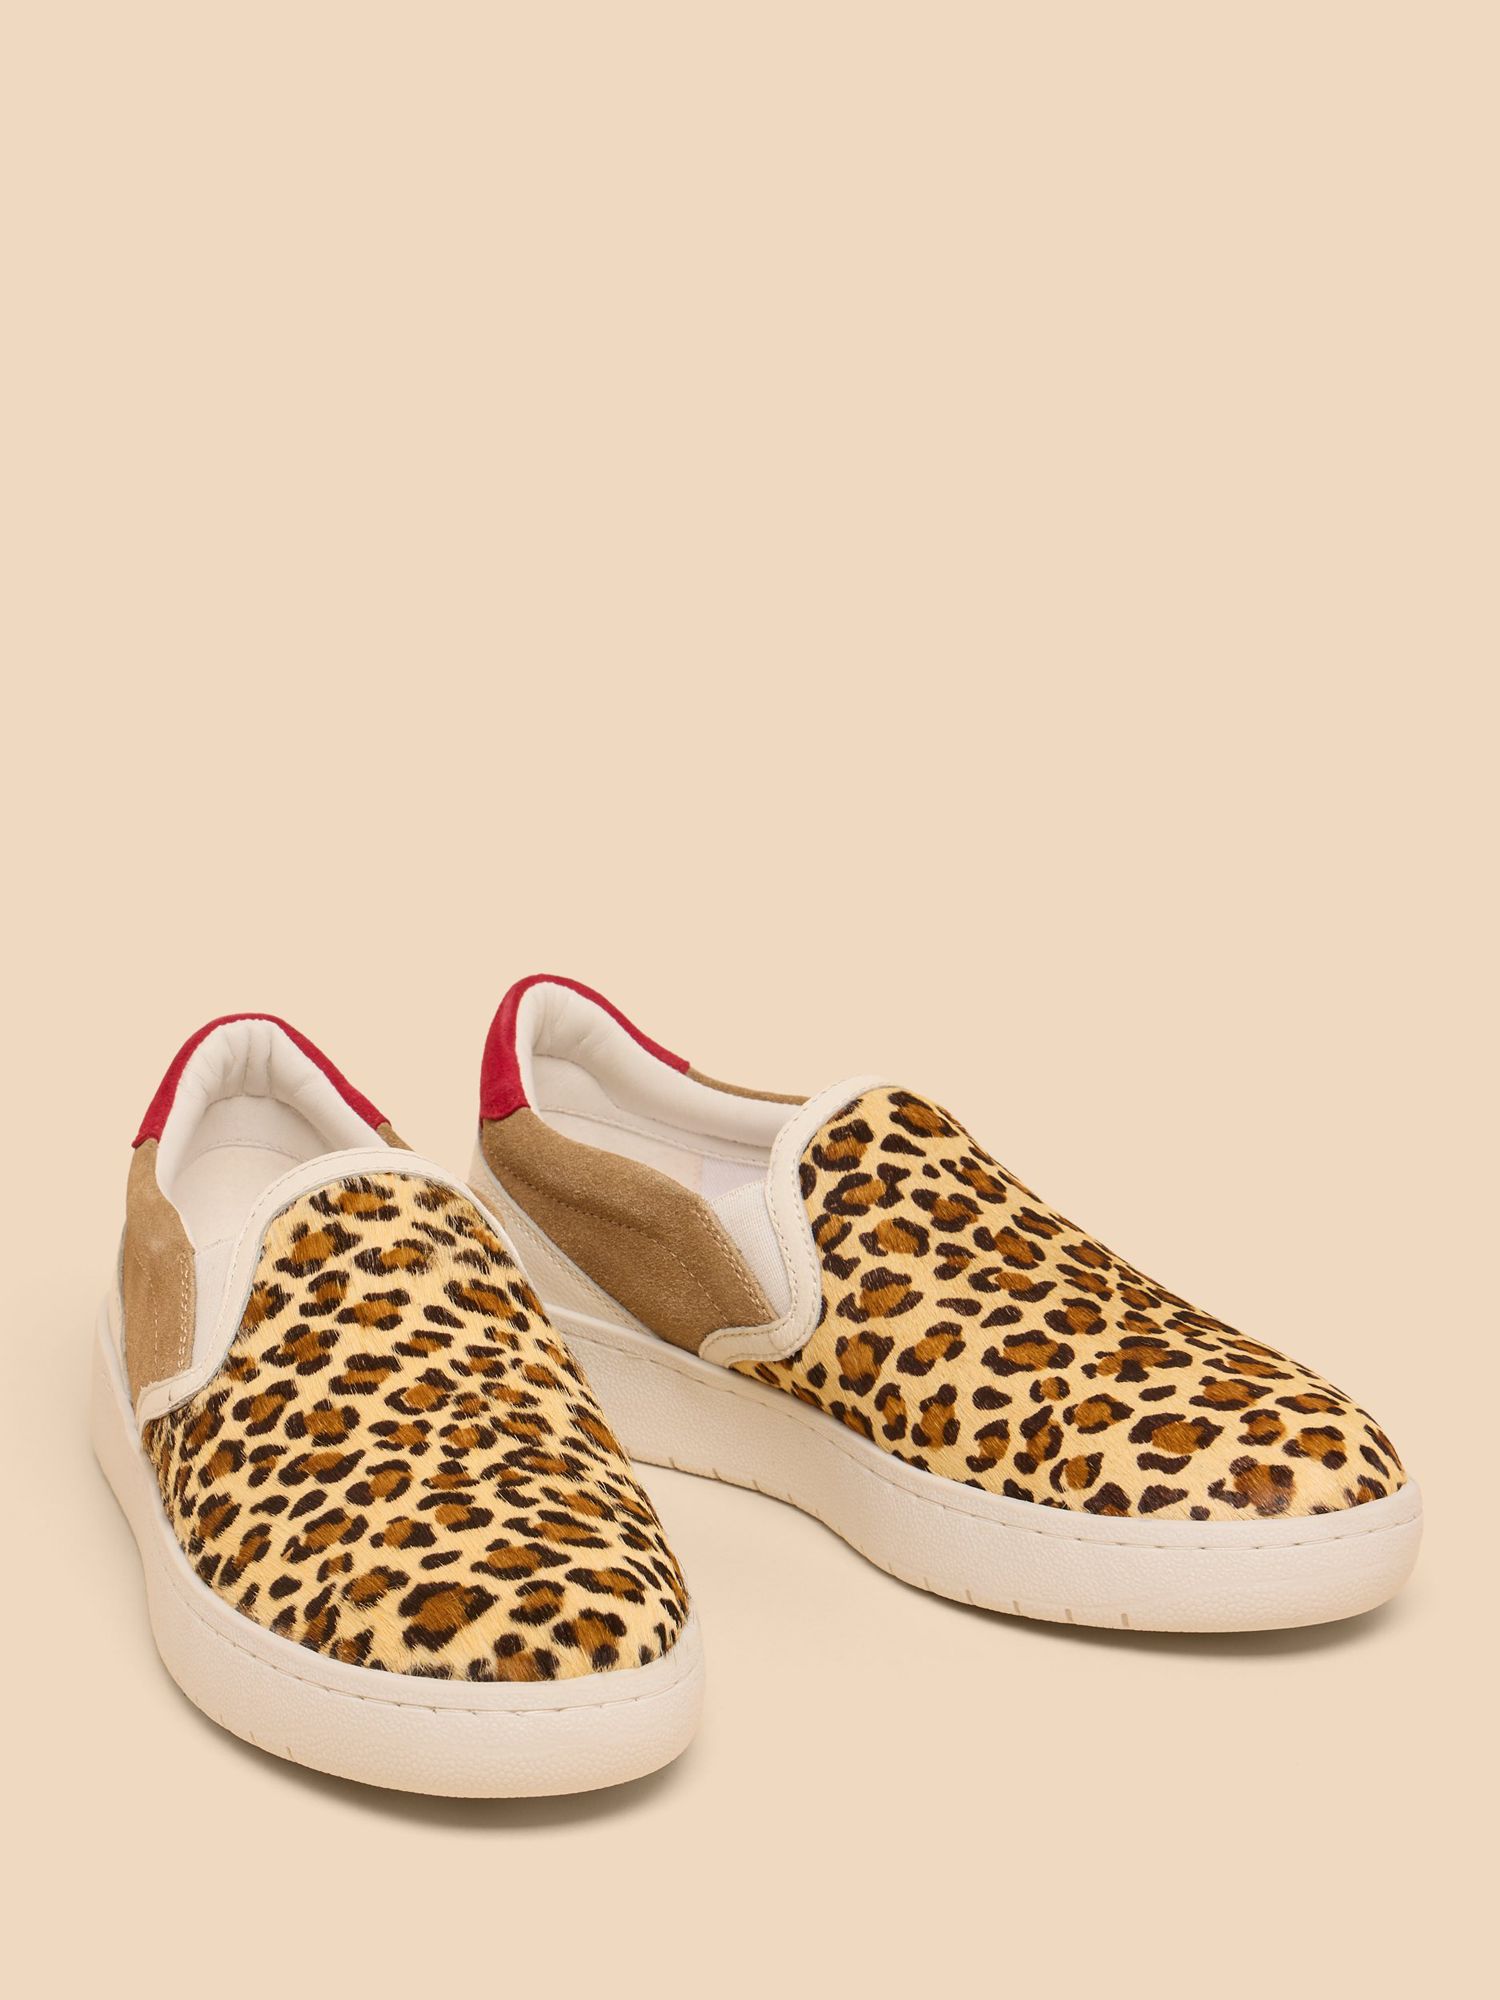 Buy White Stuff Leopard Print Slip On Leather Trainers, Multi Online at johnlewis.com